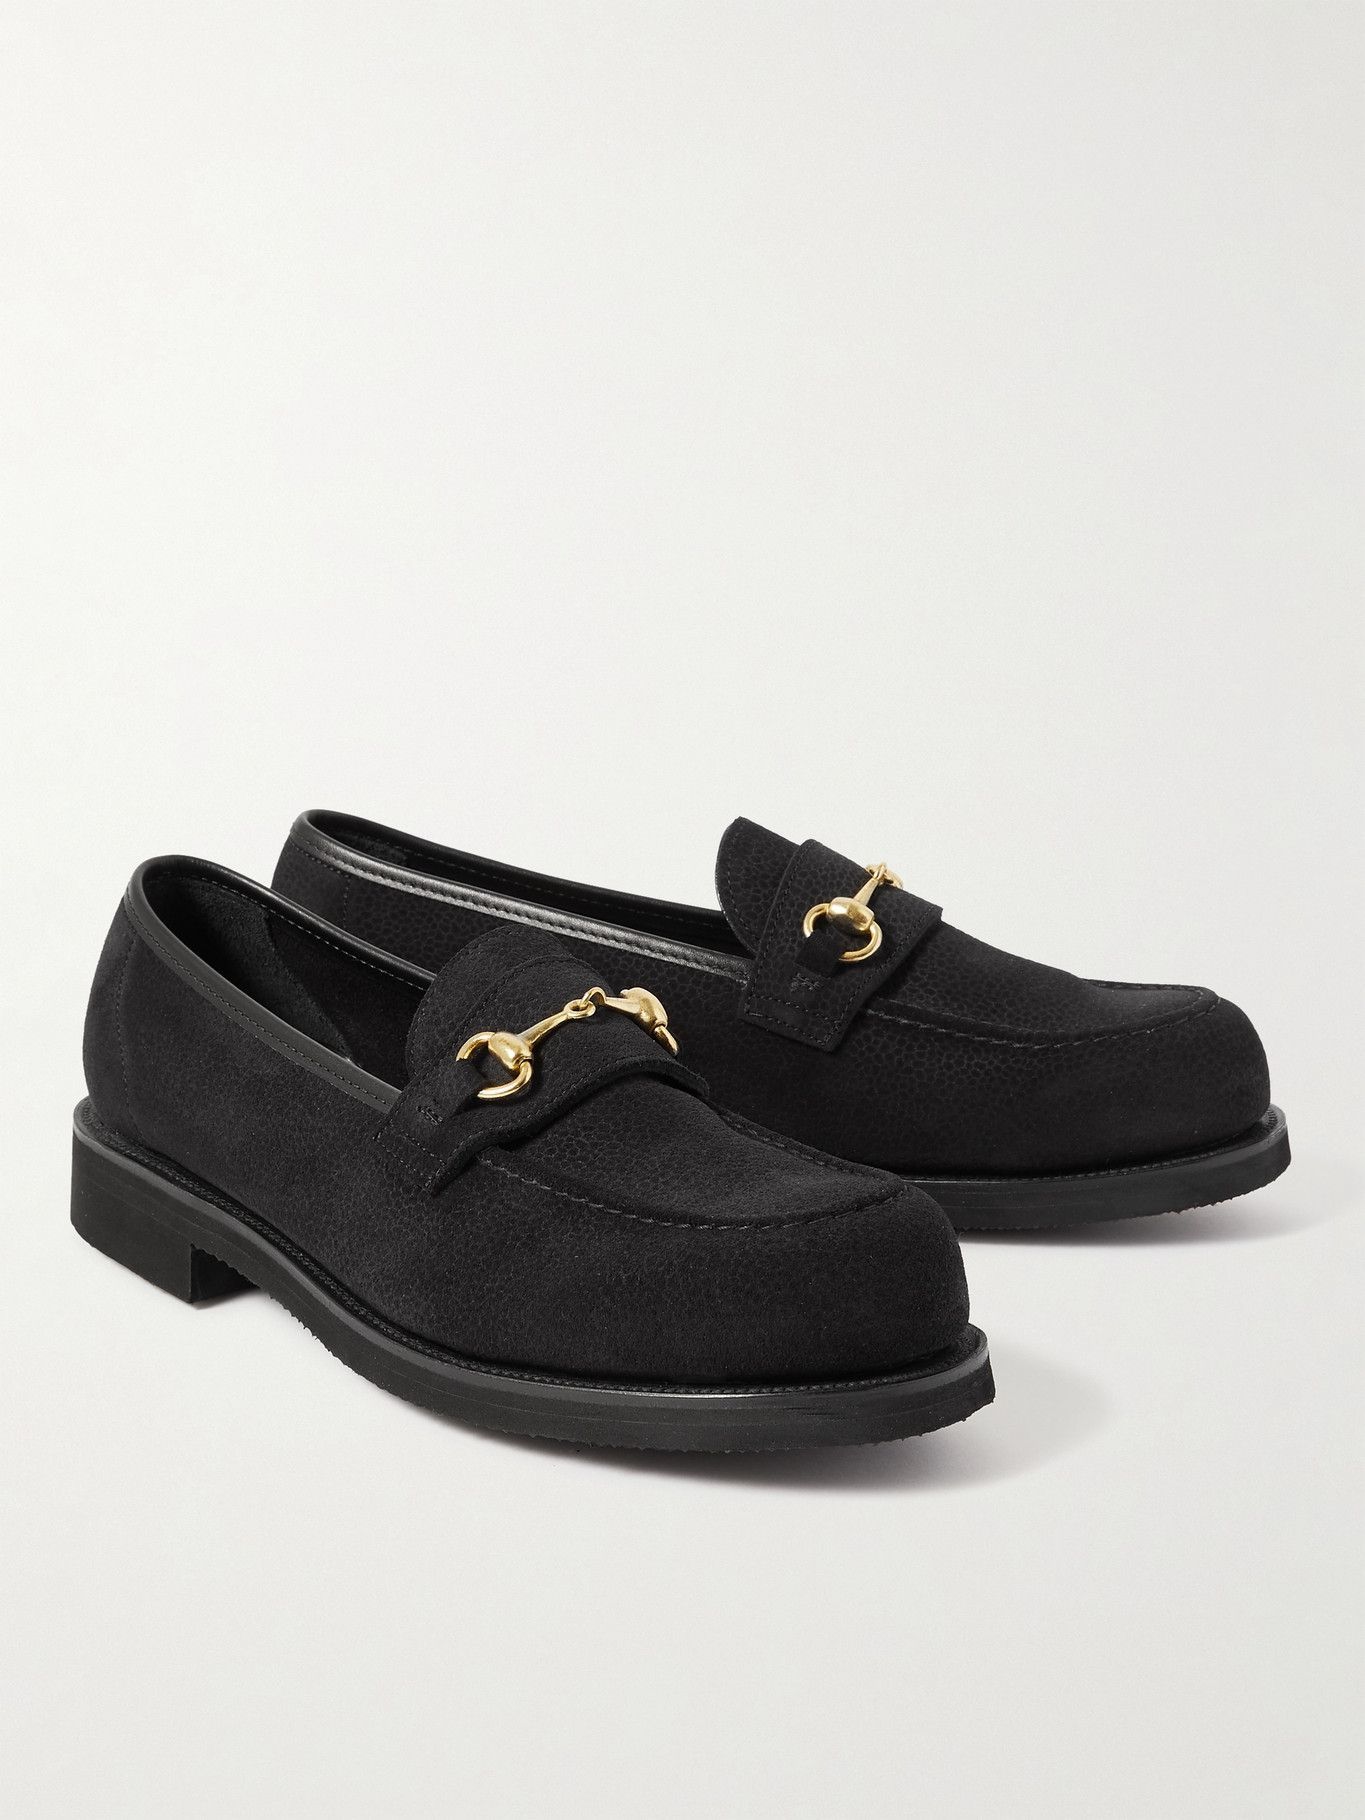 George Cleverley - Colony Full-Grain Suede Loafers - Black George Cleverley